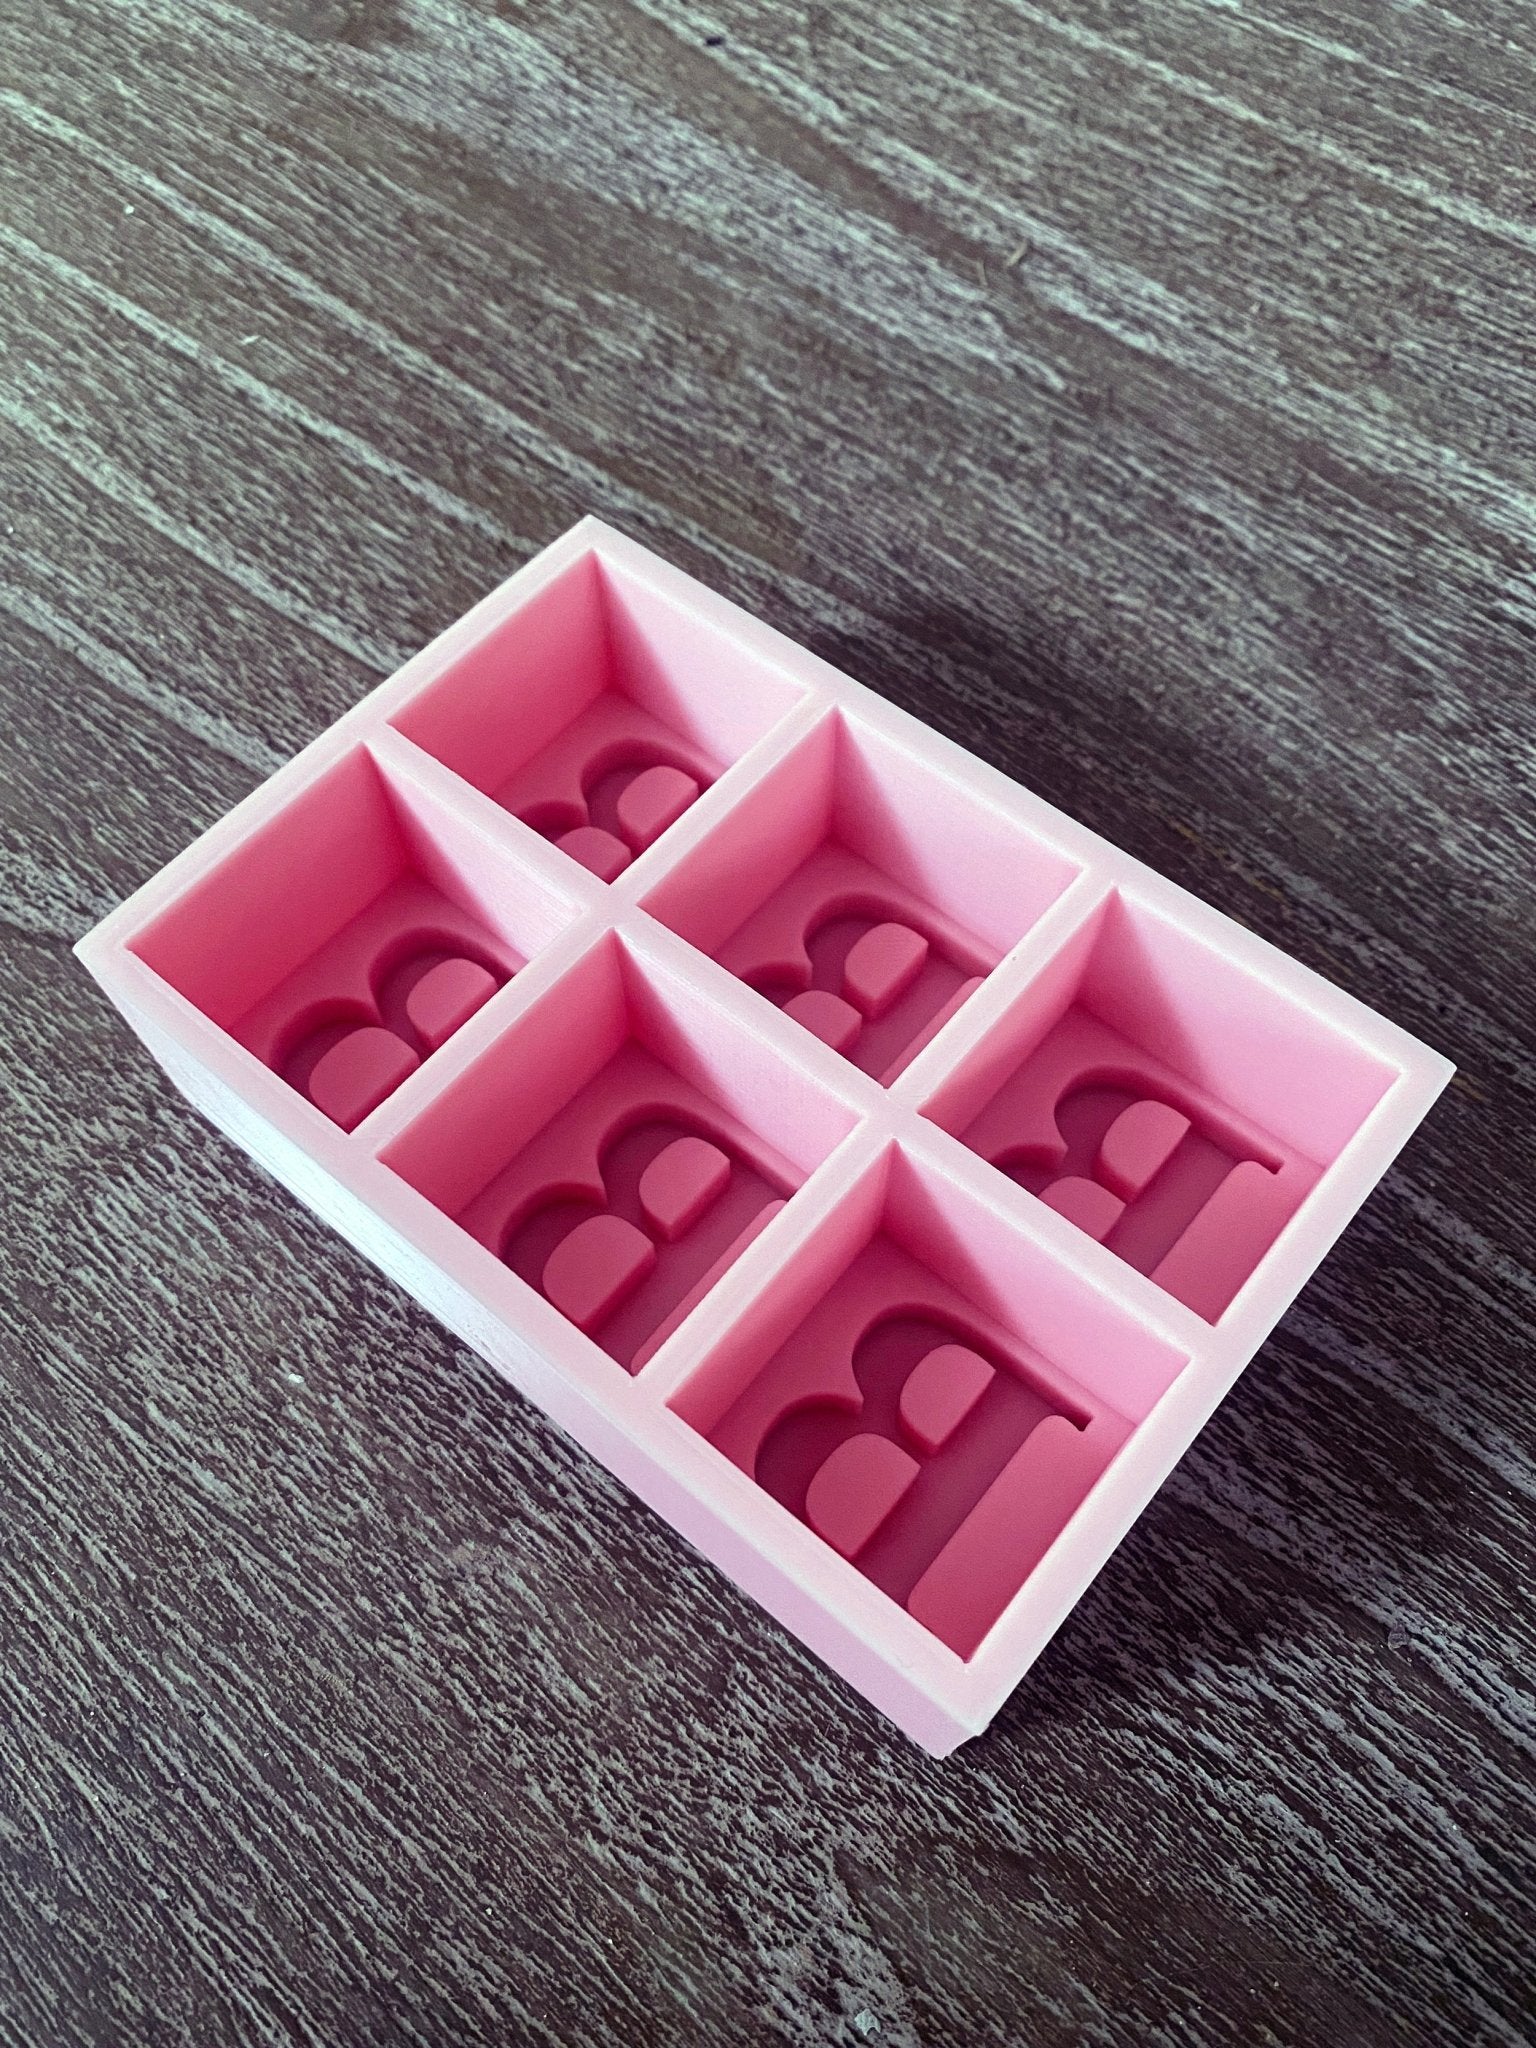 How To Create a Custom Ice Cube Tray Using Food-Safe Silicone 